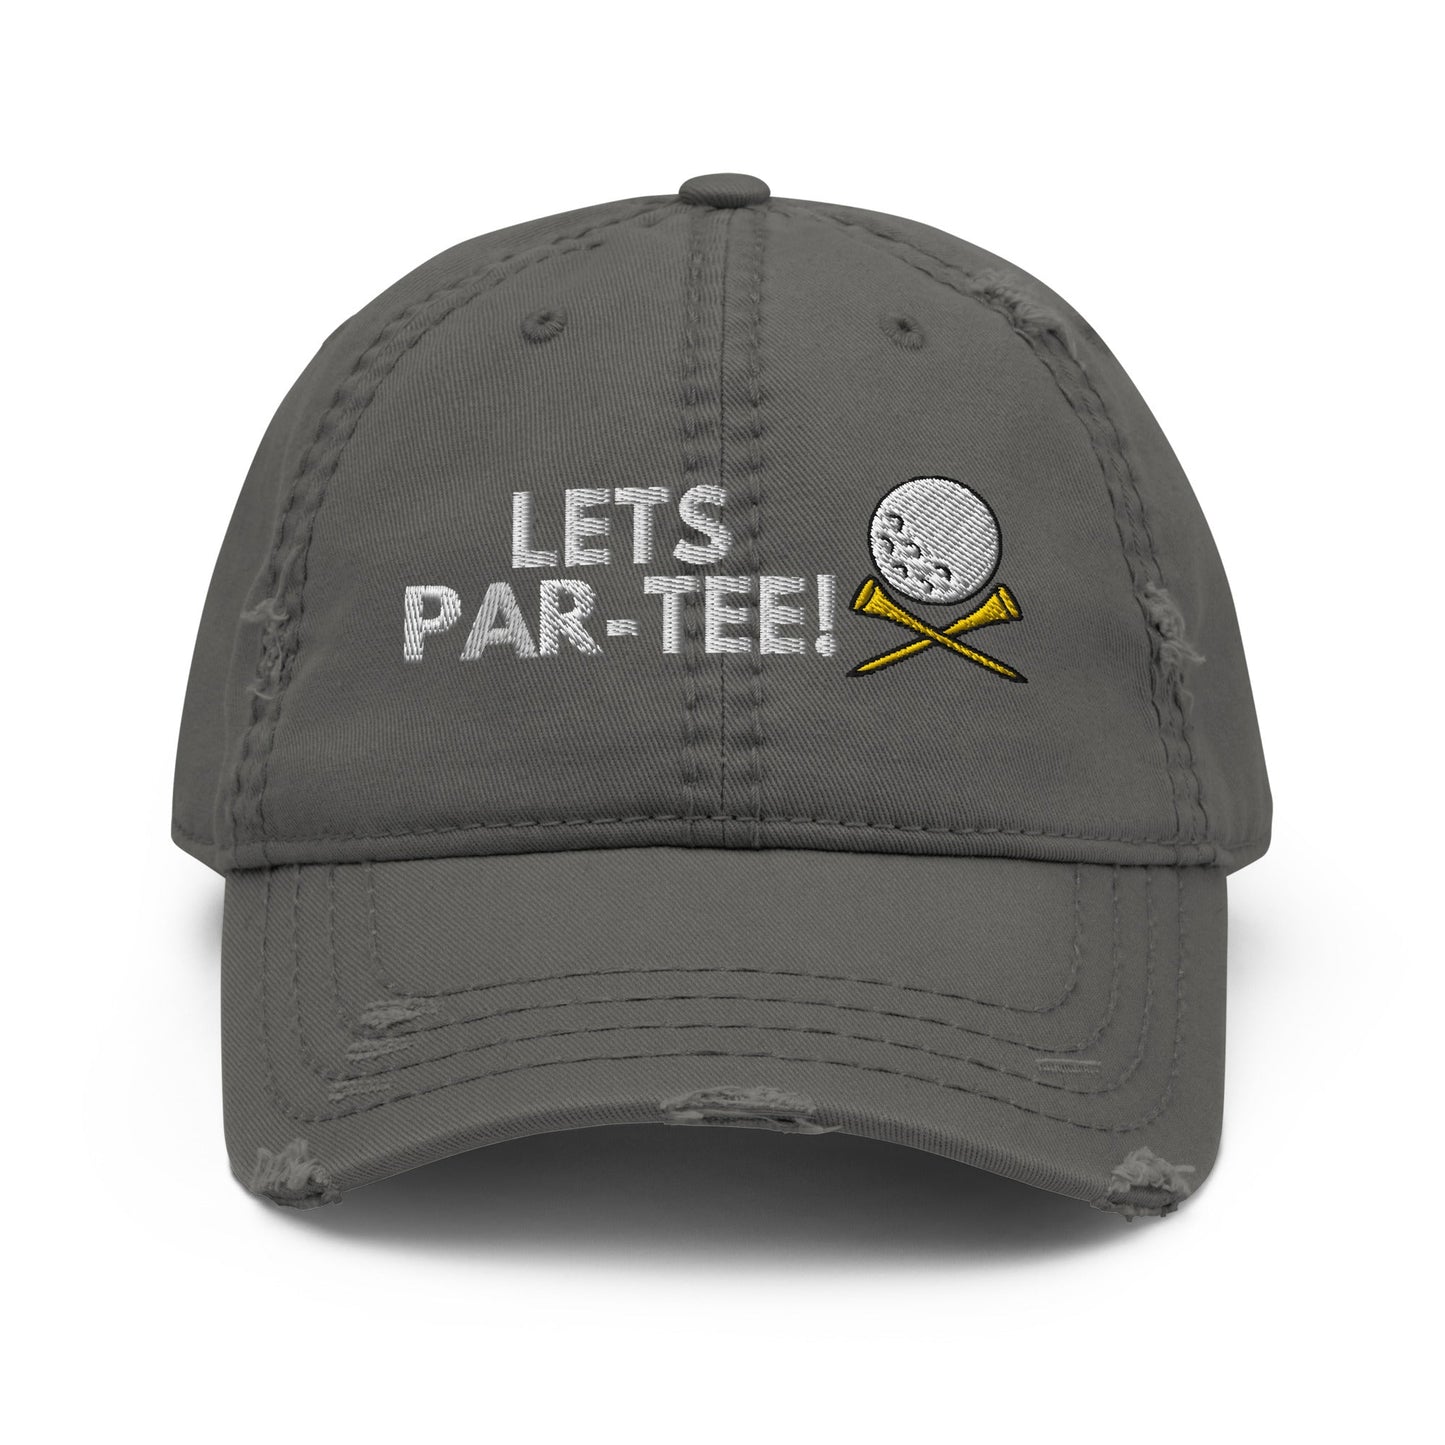 Funny Golfer Gifts  Distressed Cap Charcoal Grey Lets Par-Tee Hat Distressed Hat